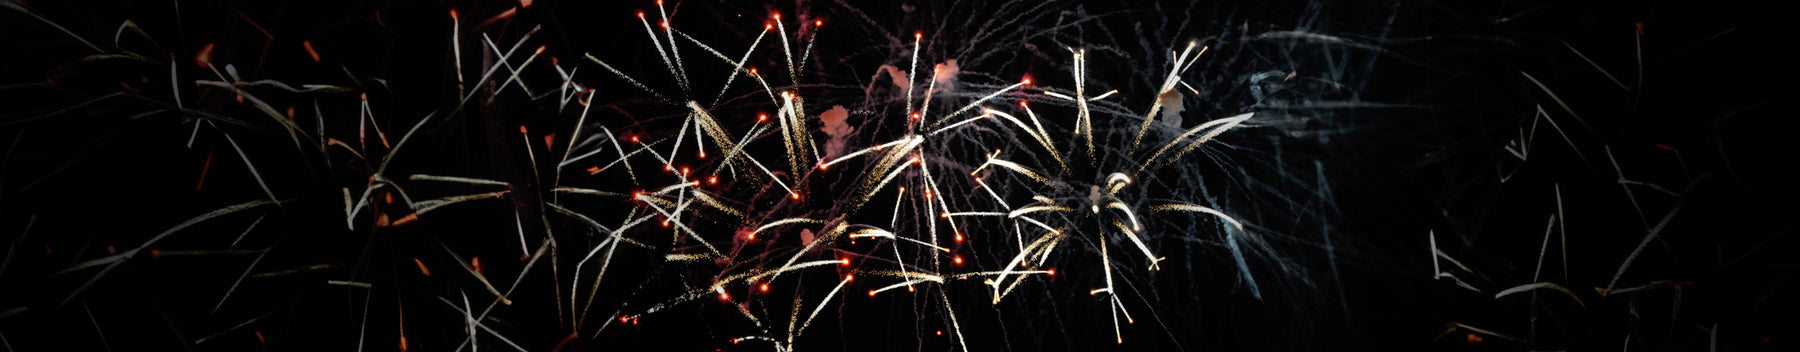 Crackling Crossroads: Exploring the Art and Science of the Crossette Firework Effect